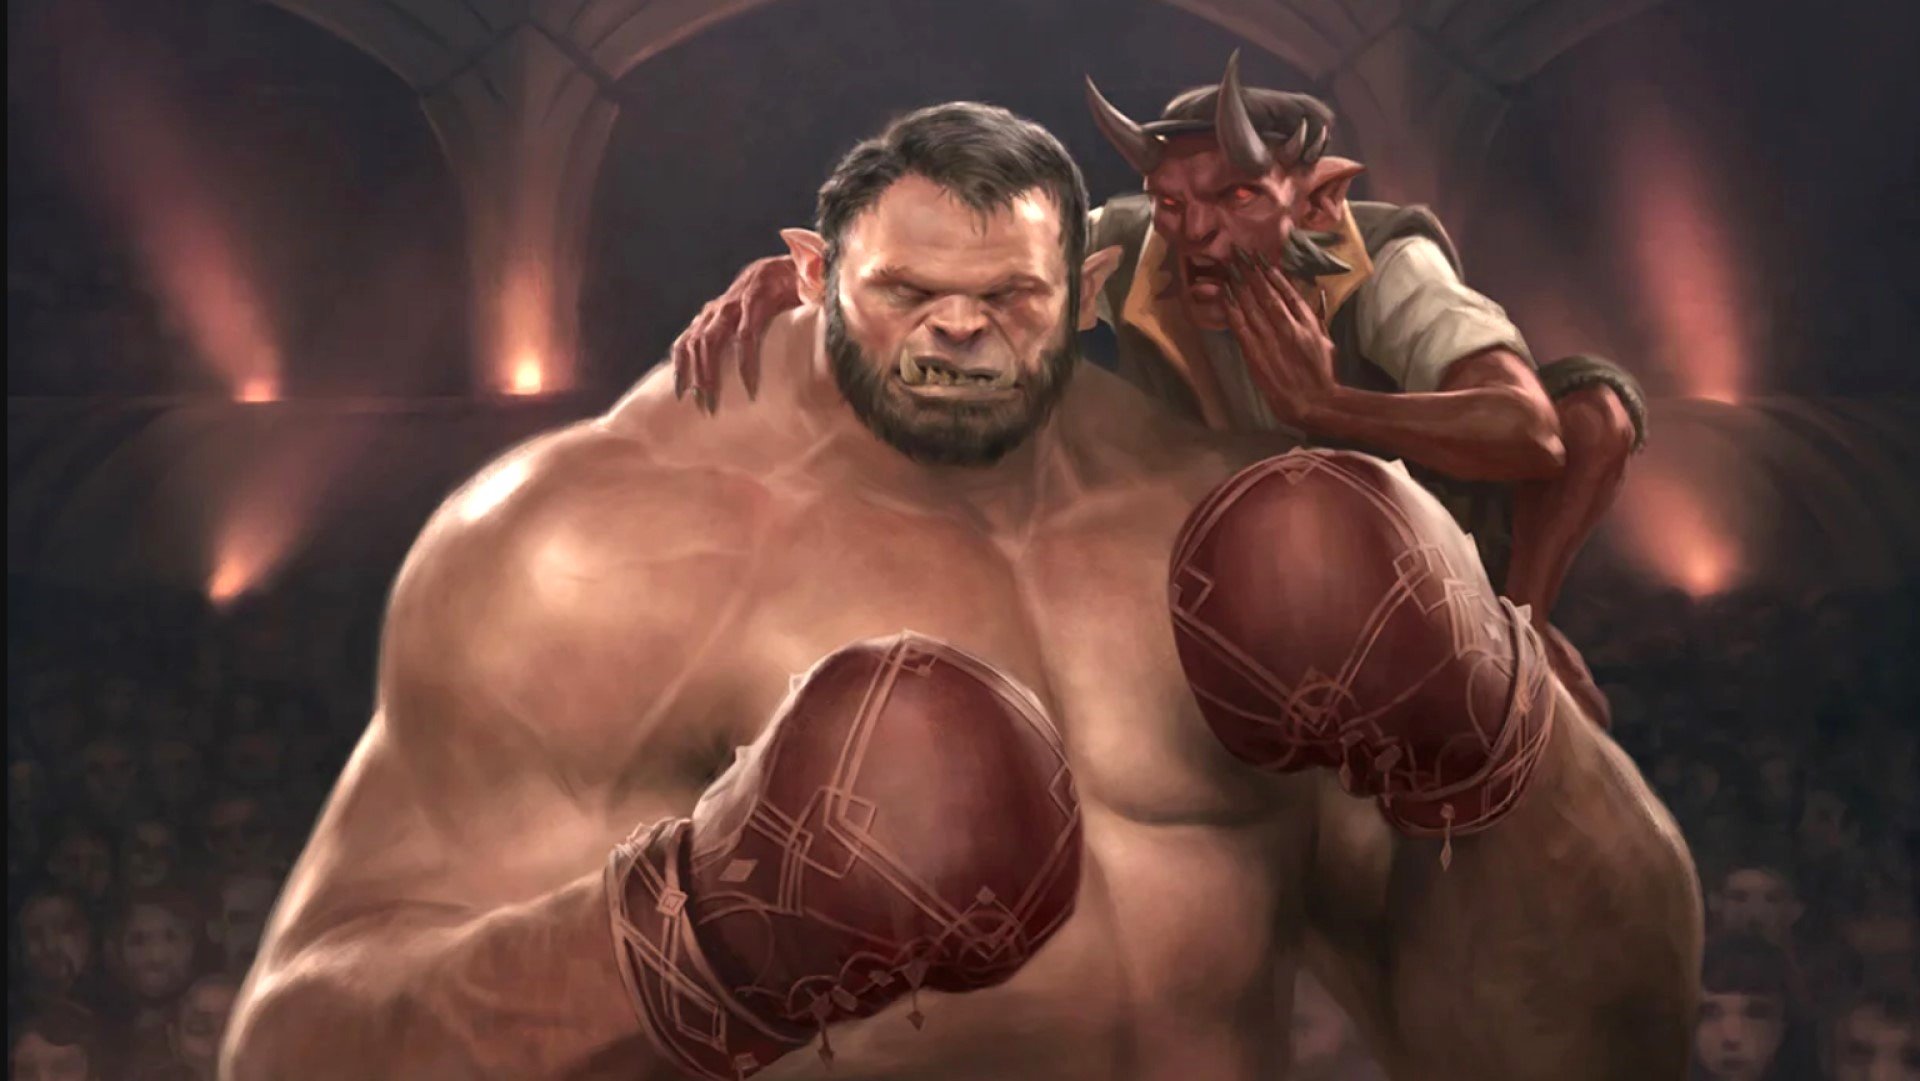 dnd-subclasses-barbarian-fighter-boxer.jpg